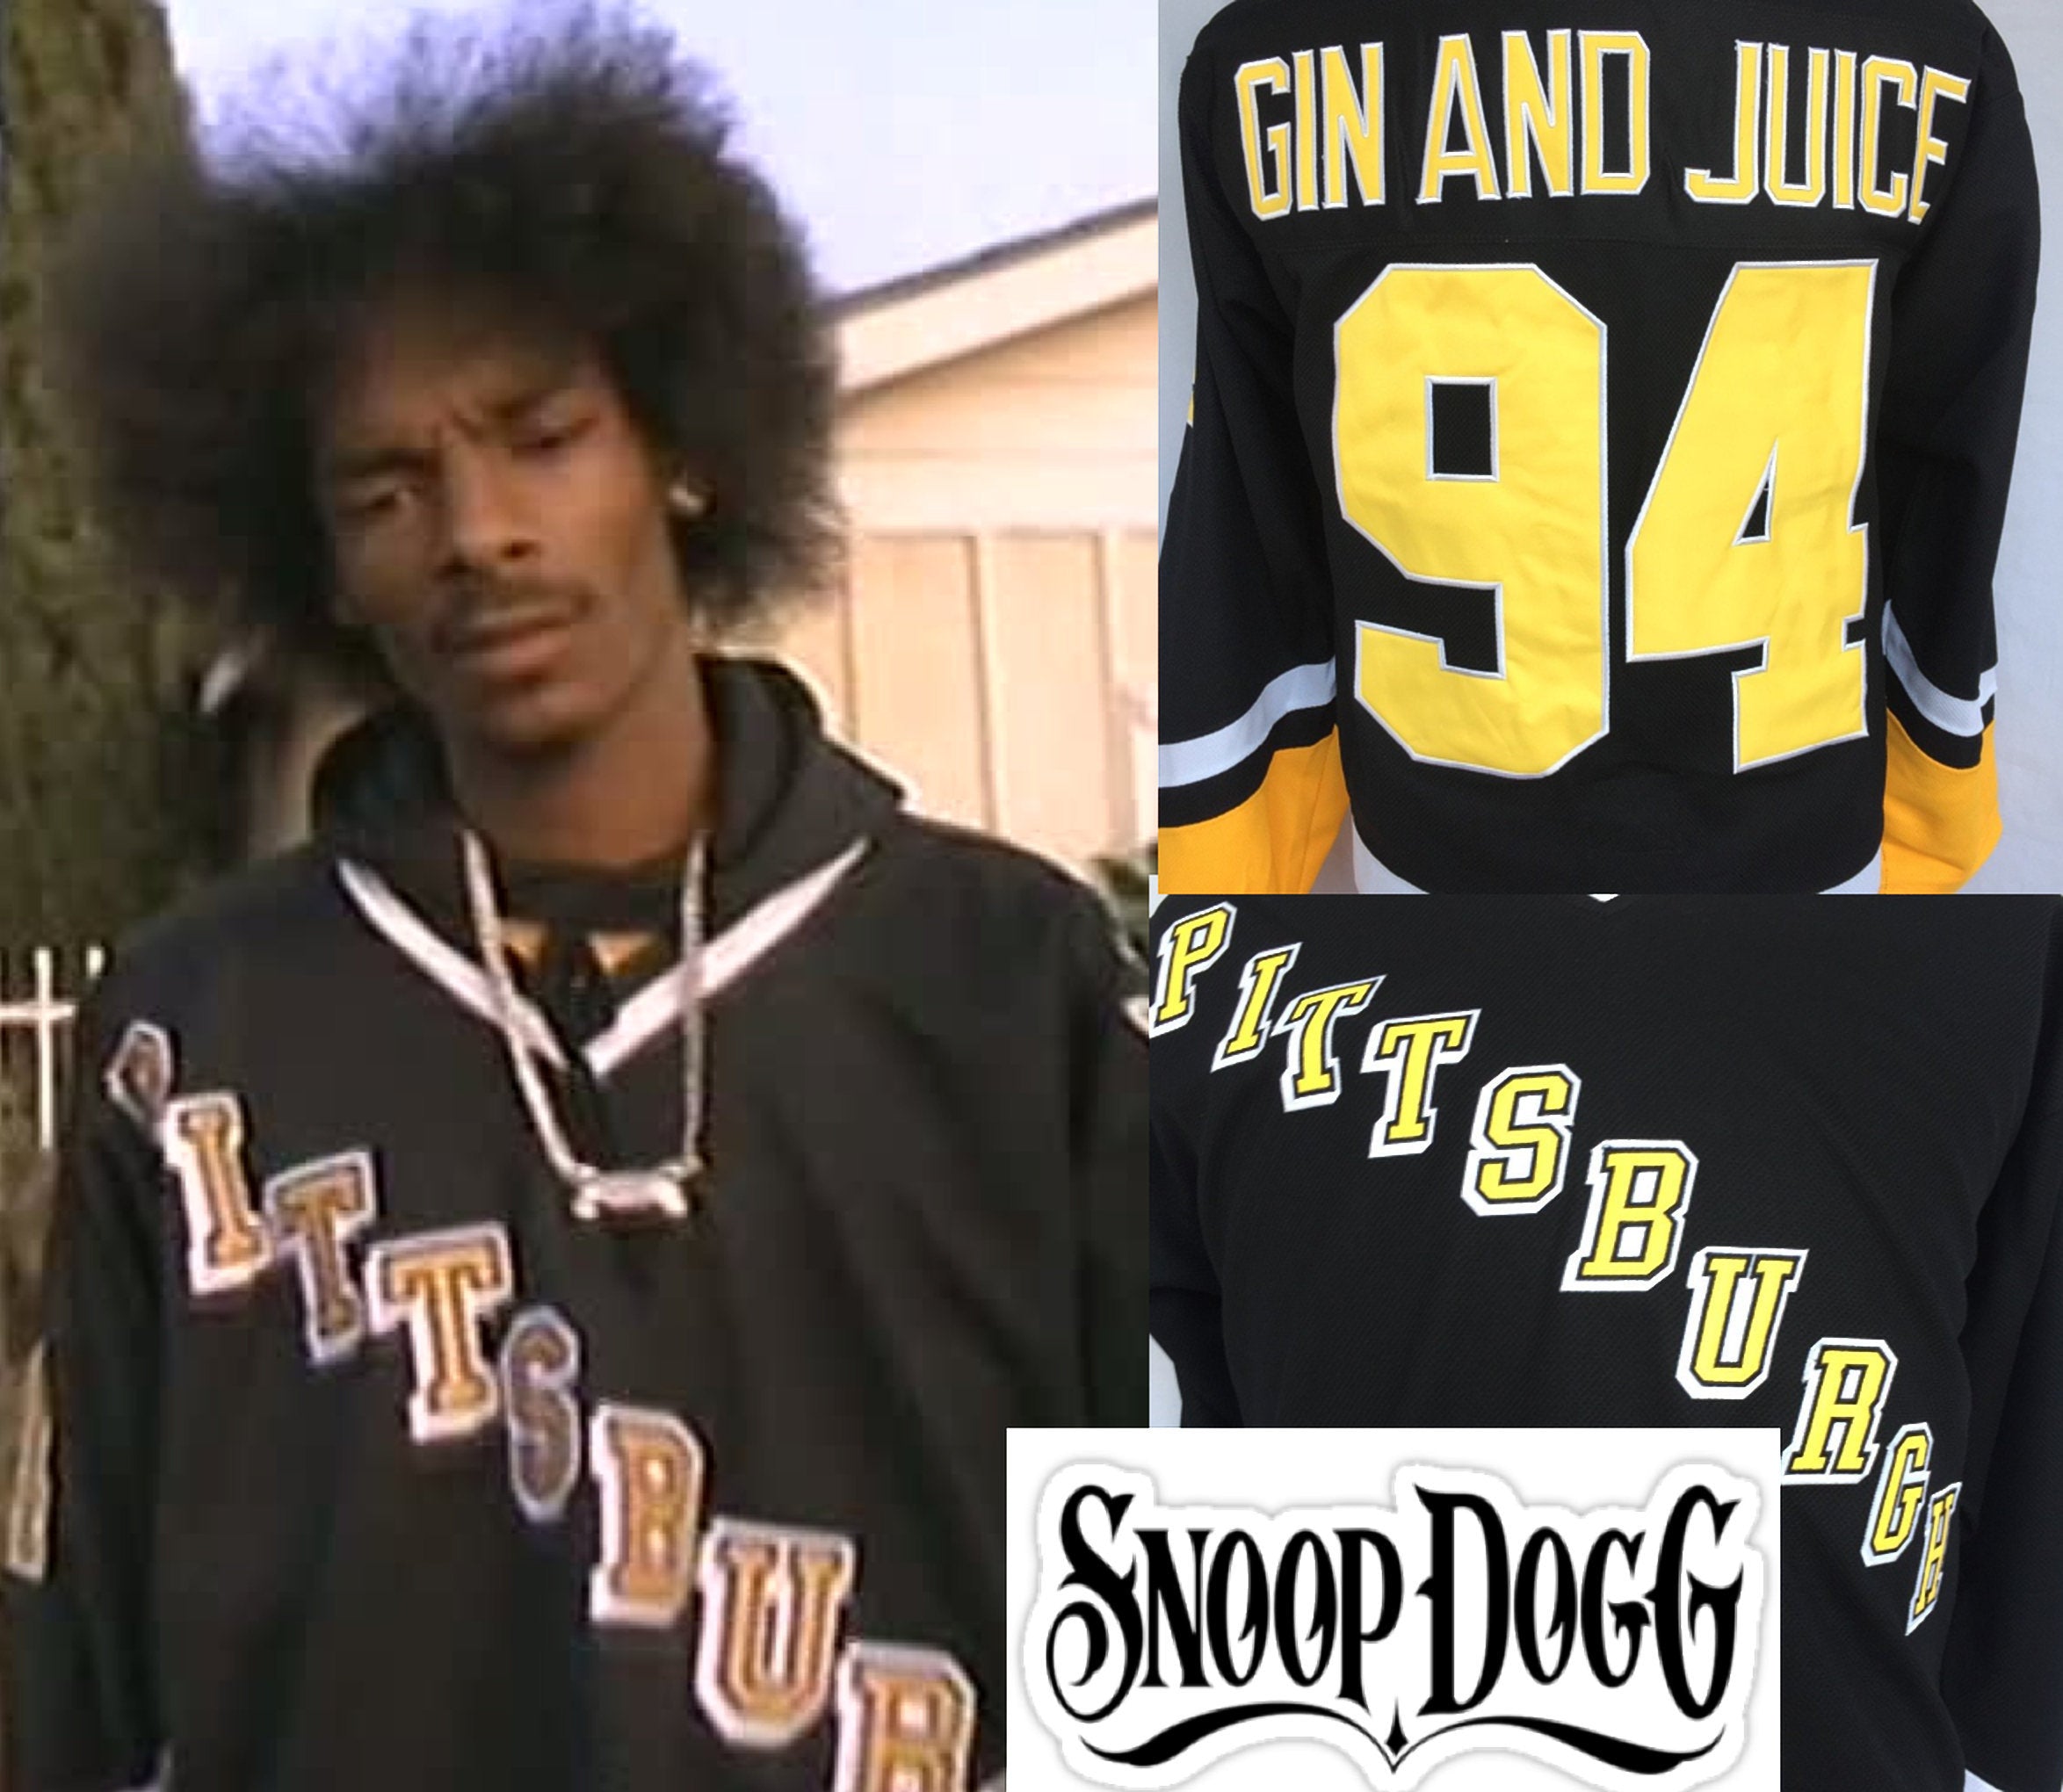 Snoop Dogg Signed Penguins Jersey Inscribed Doggy & 8 Hours